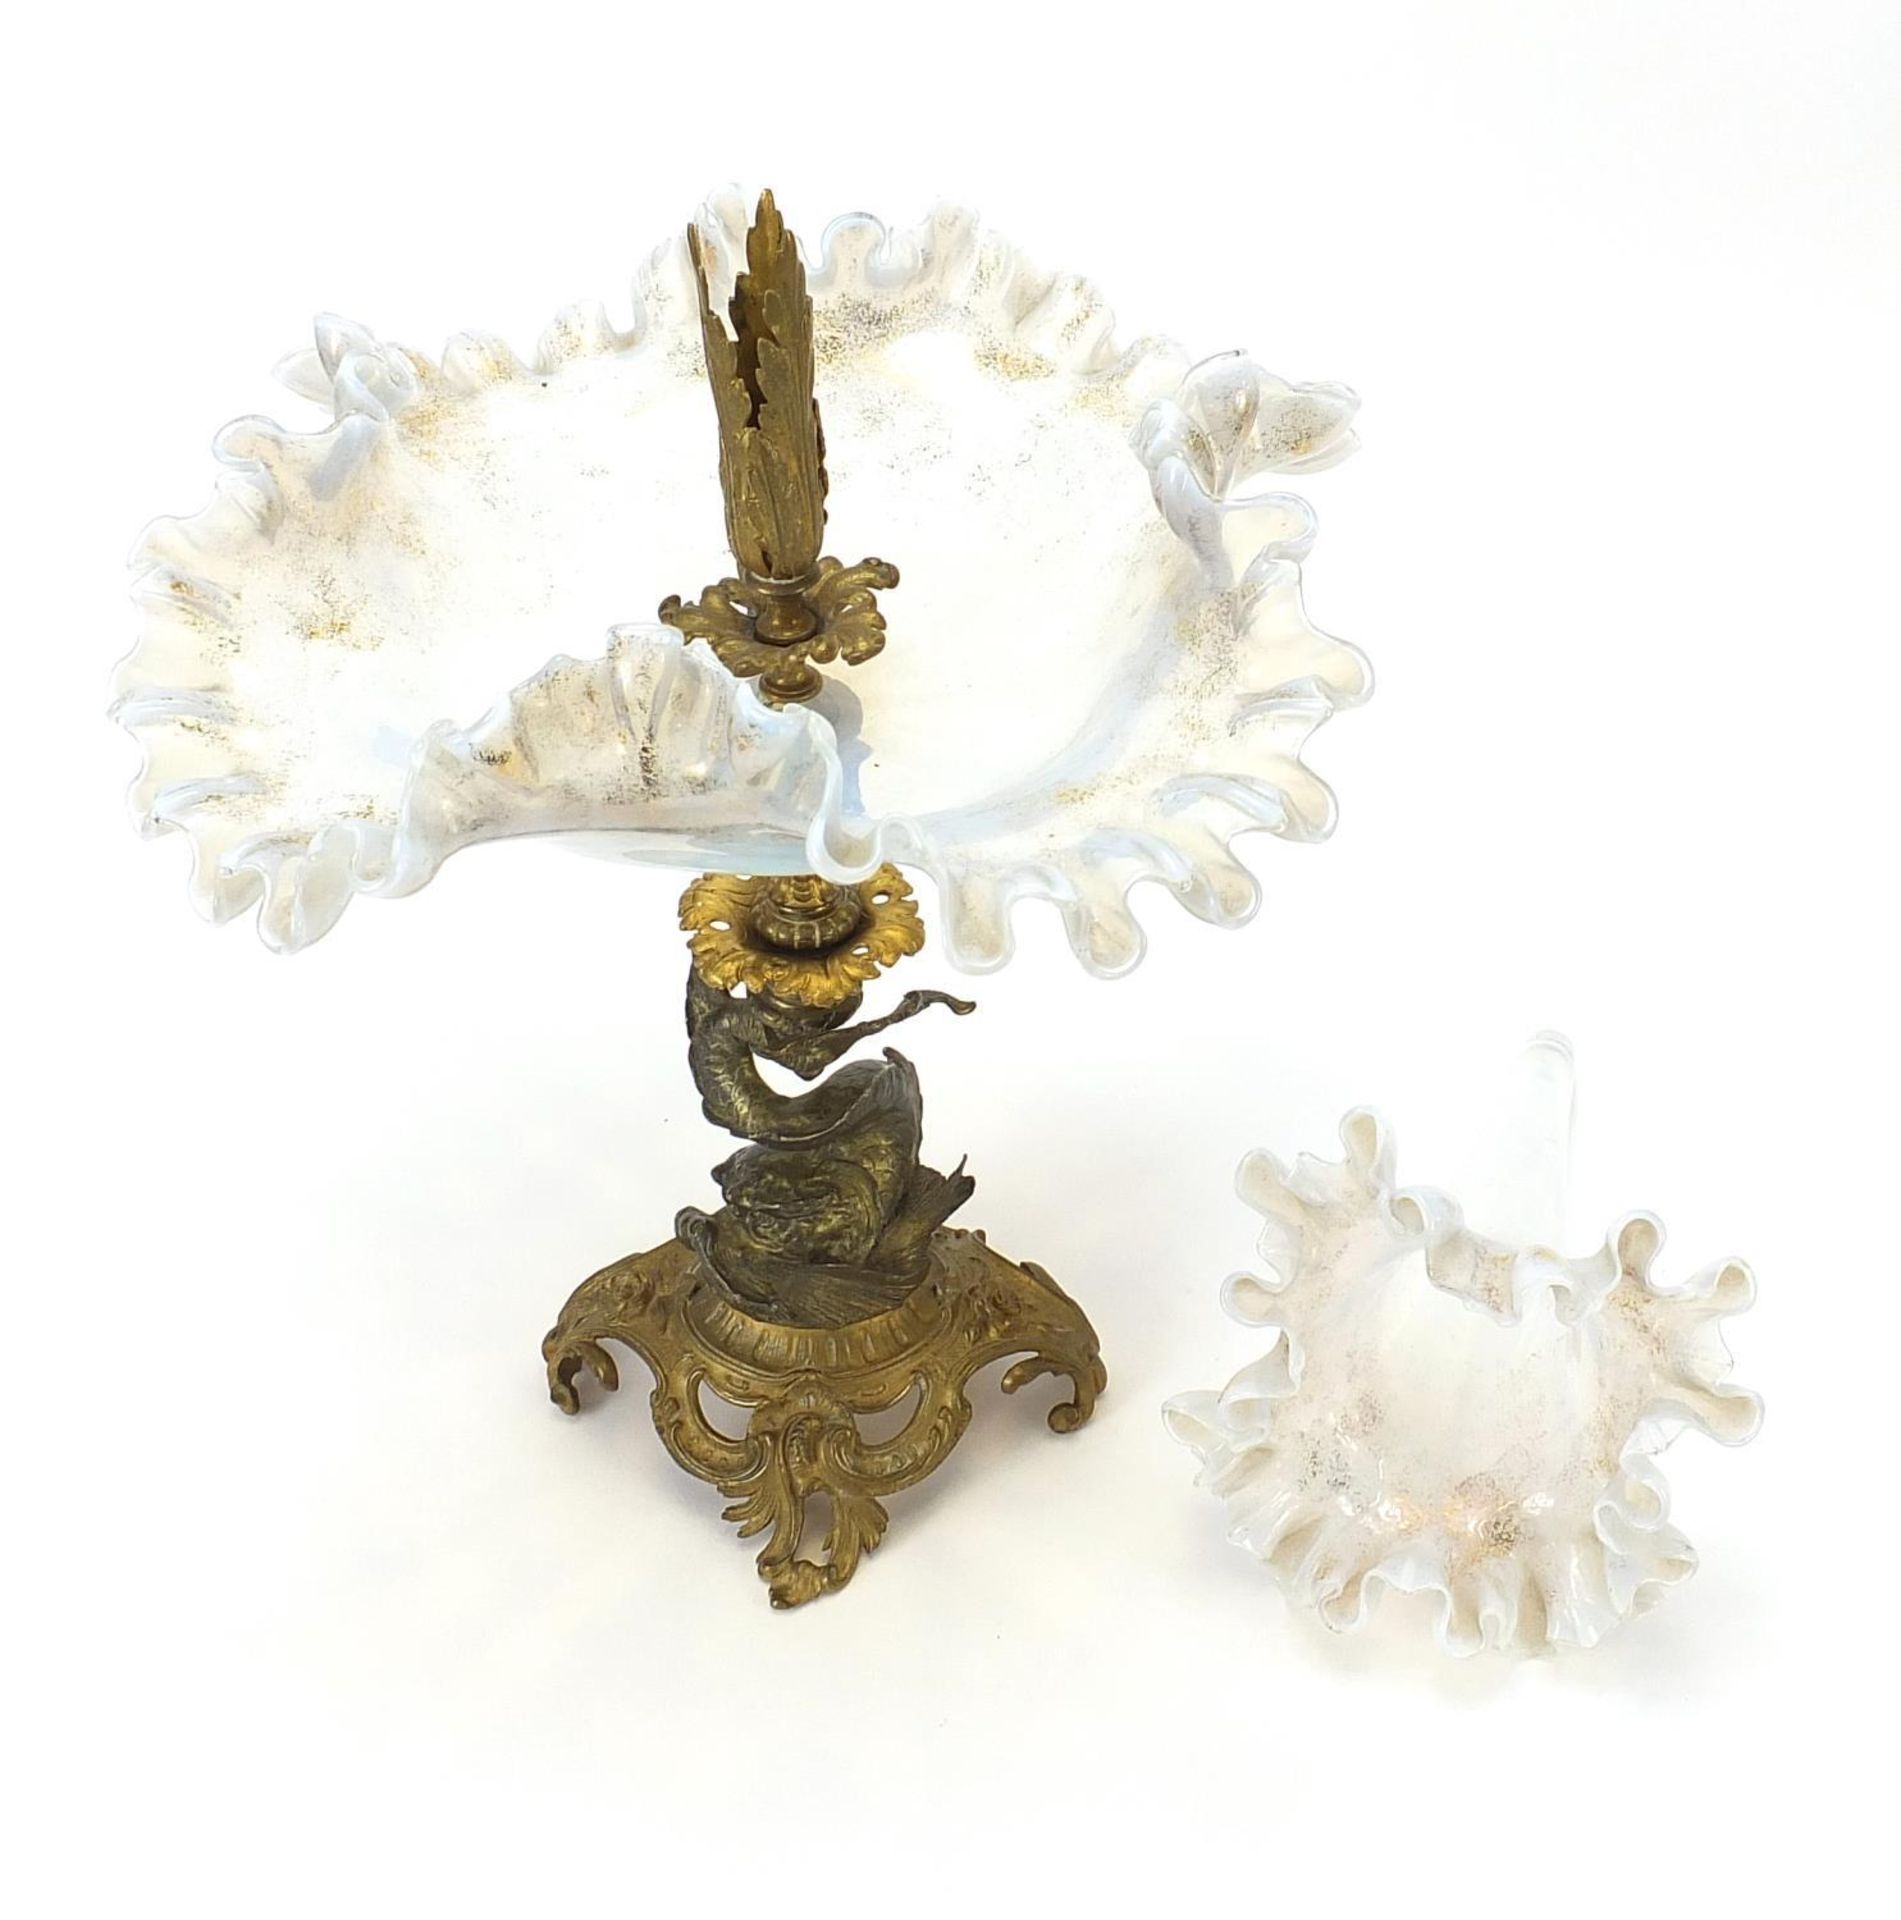 19th century opaline glass and gilt bronze dolphin centrepiece with frilled glass flute, 56cm high - Image 6 of 6